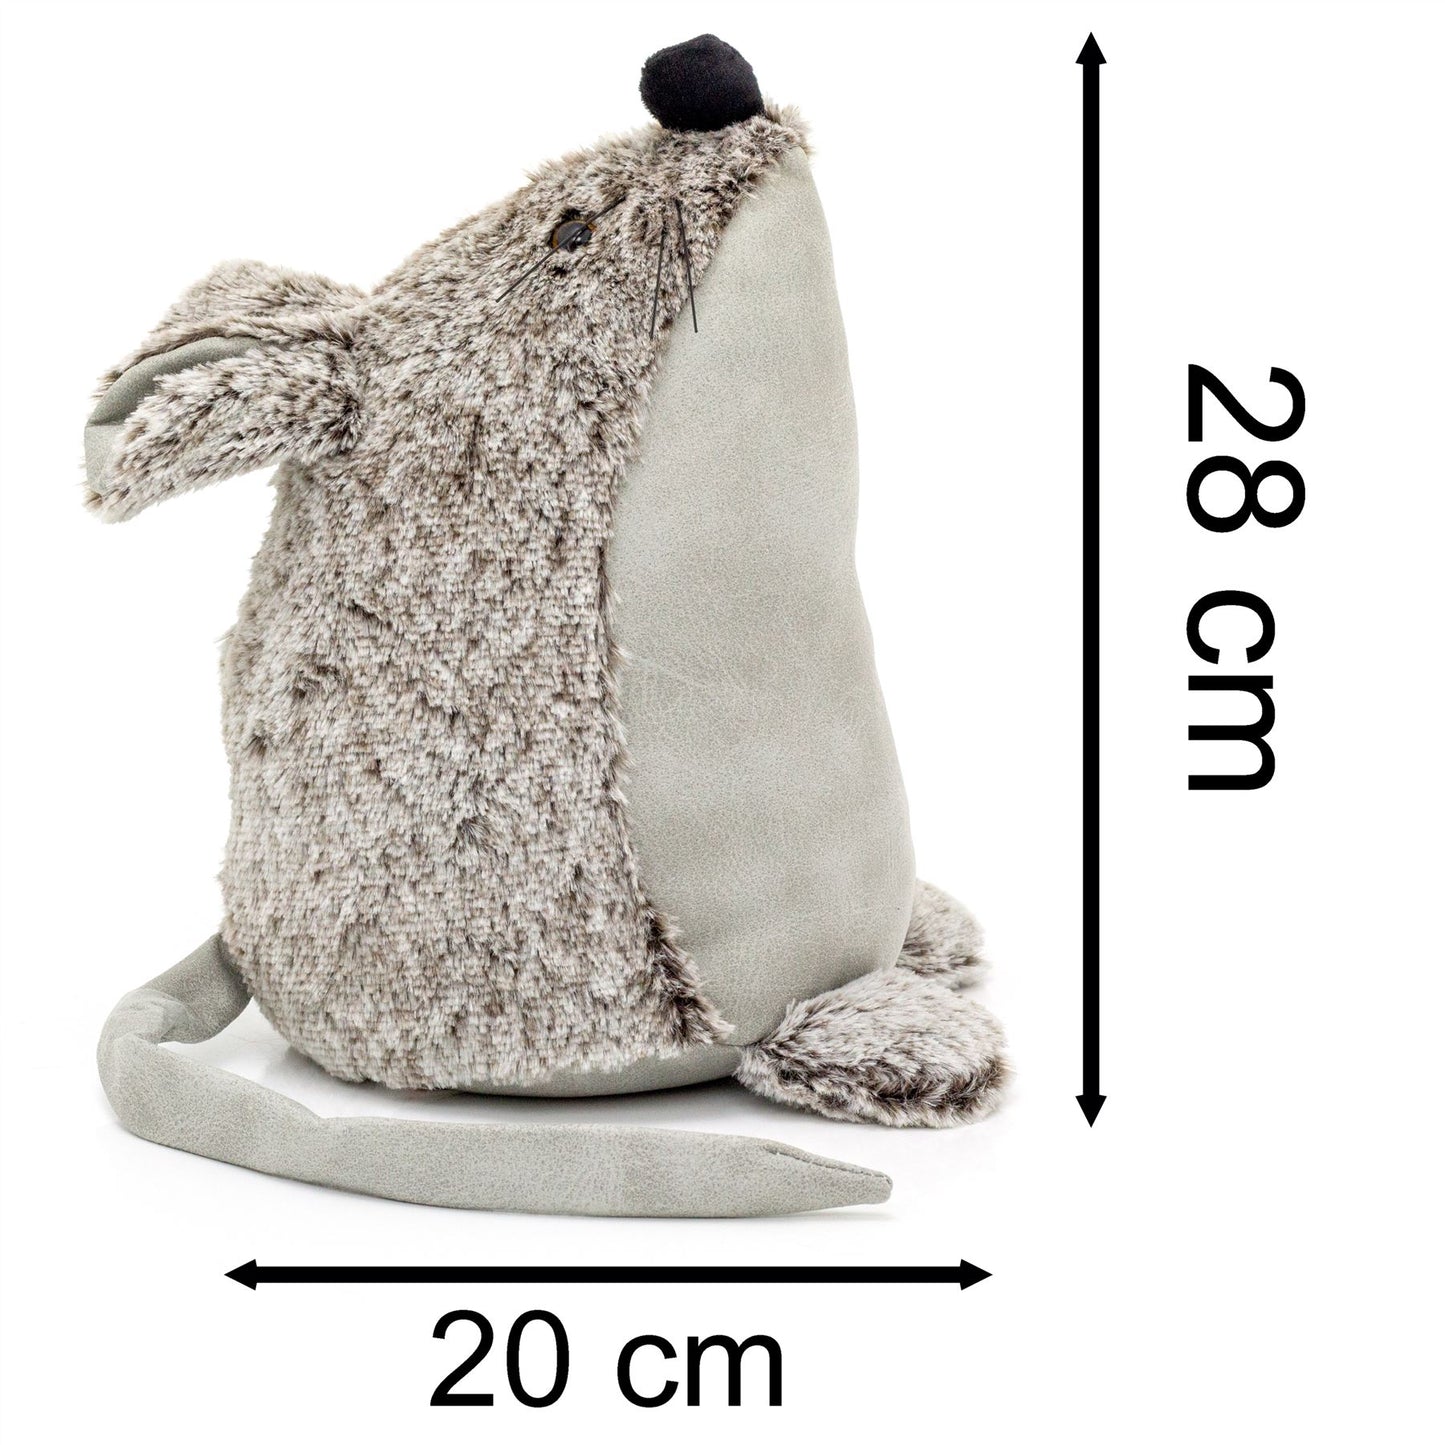 Bella Mouse Doorstop | Faux Leather Weighted Grey Mouse Animal Door Stop 1.8kg